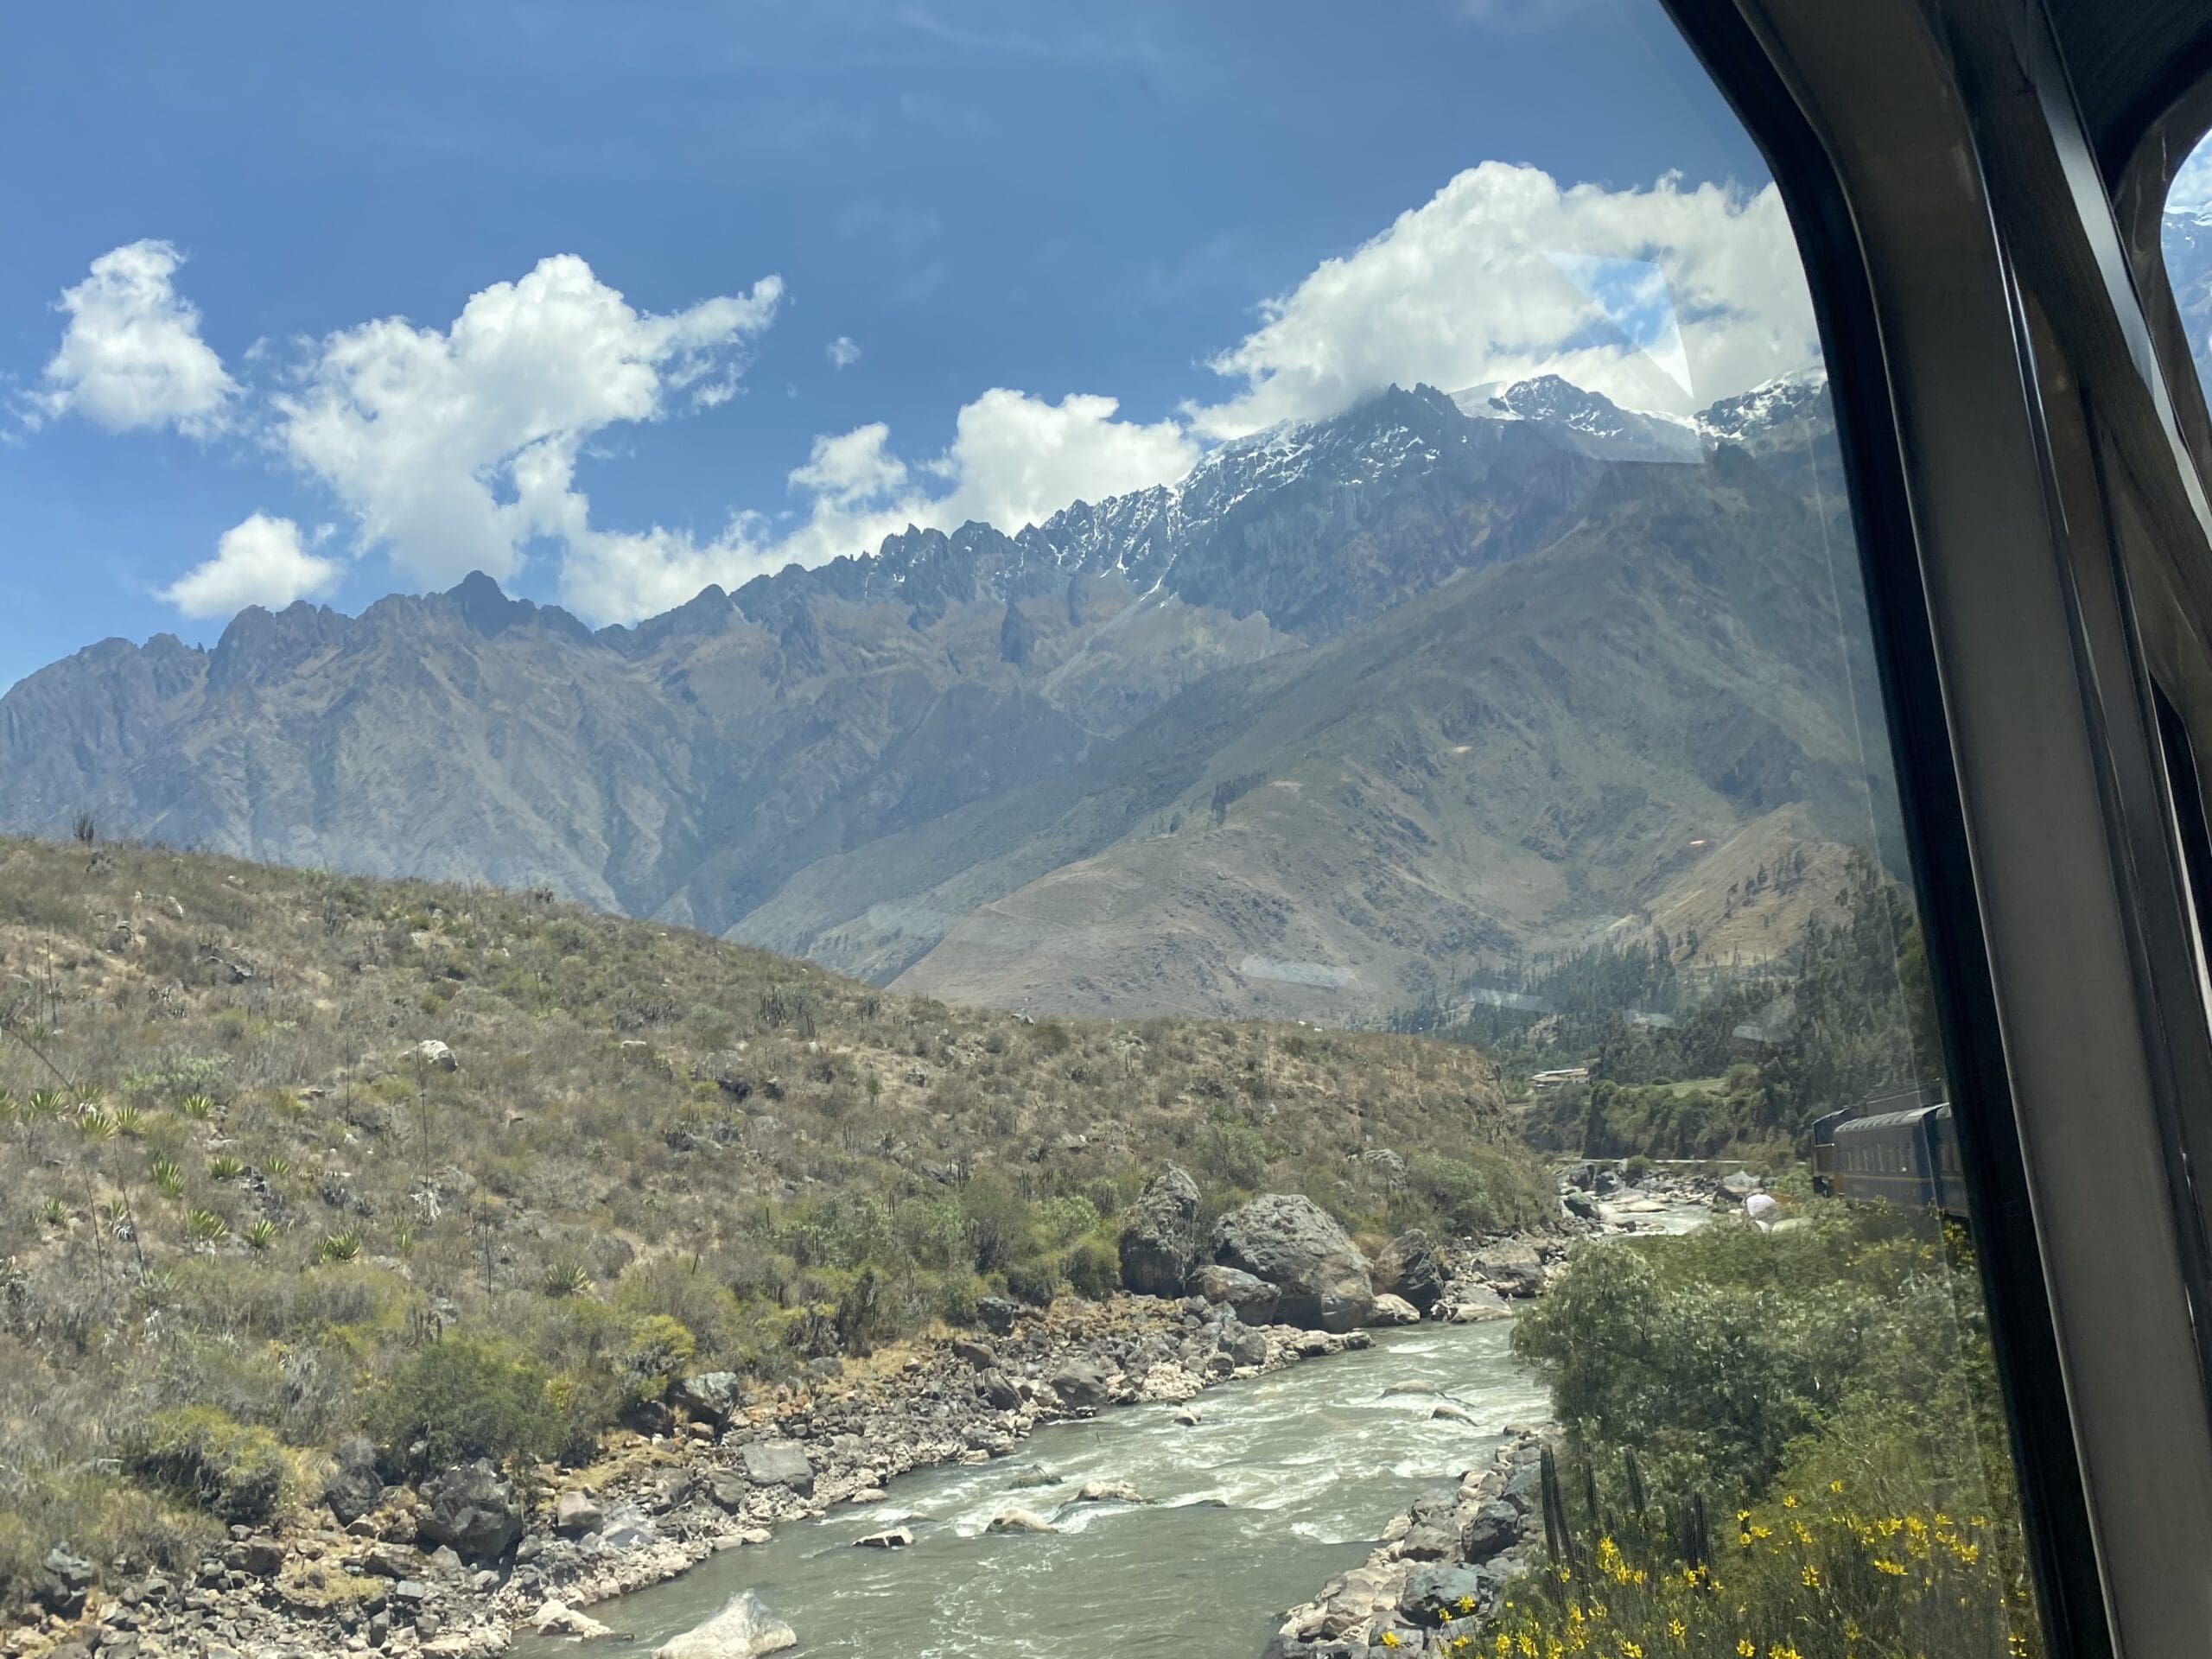 Windows on train overlooking the Andes mountains 